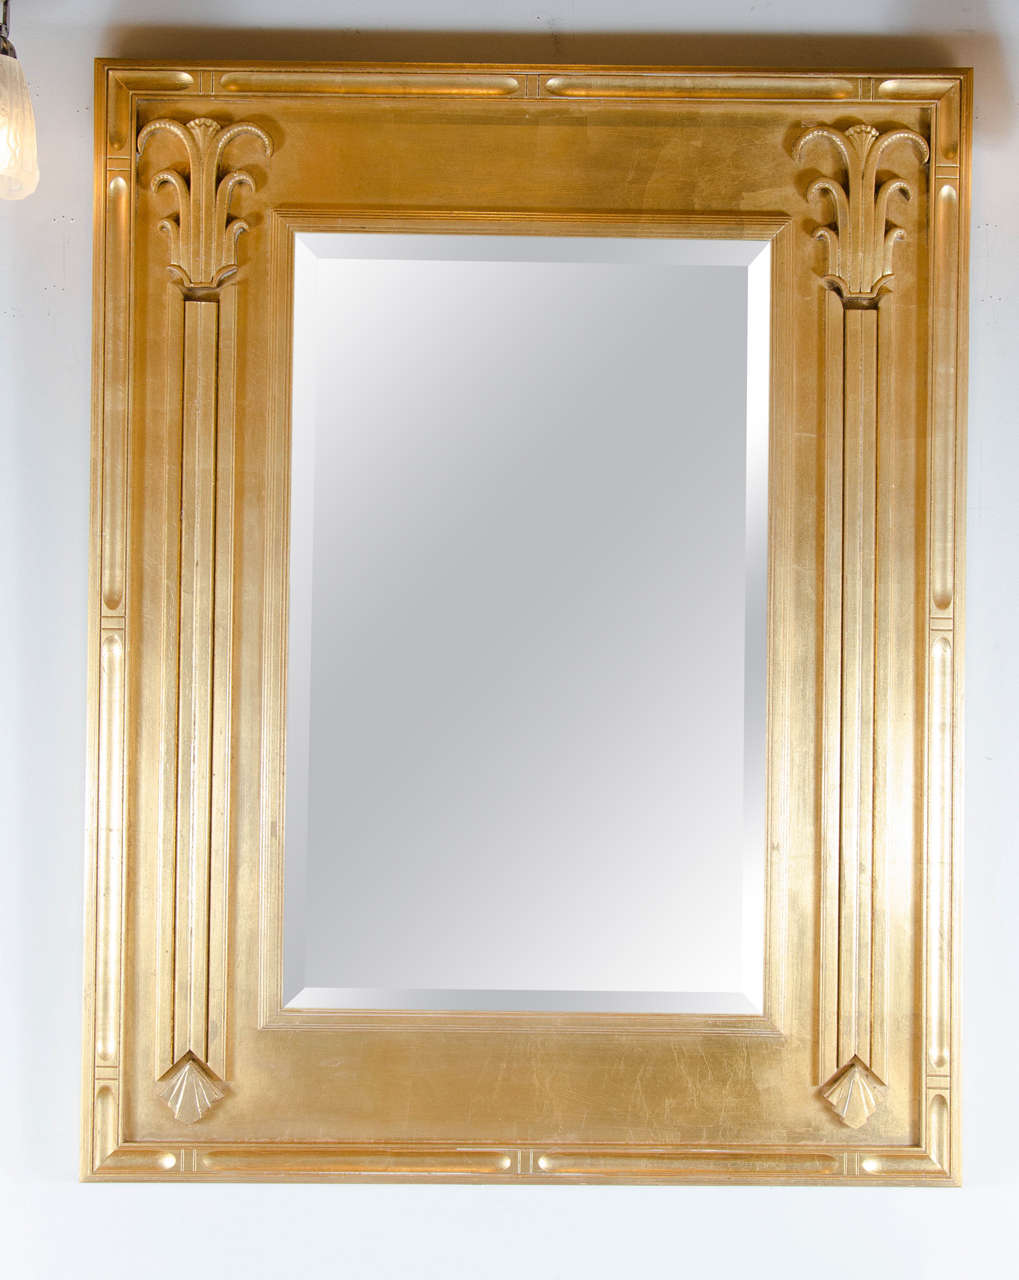 This phenomenal Art Deco 24k yellow Gilt mirror is a rare beauty in it's form. Designed with skyscraper detailing, and it's intricate details, it is a statement piece of grandeur. It is in excellent condition and would look great in any room or